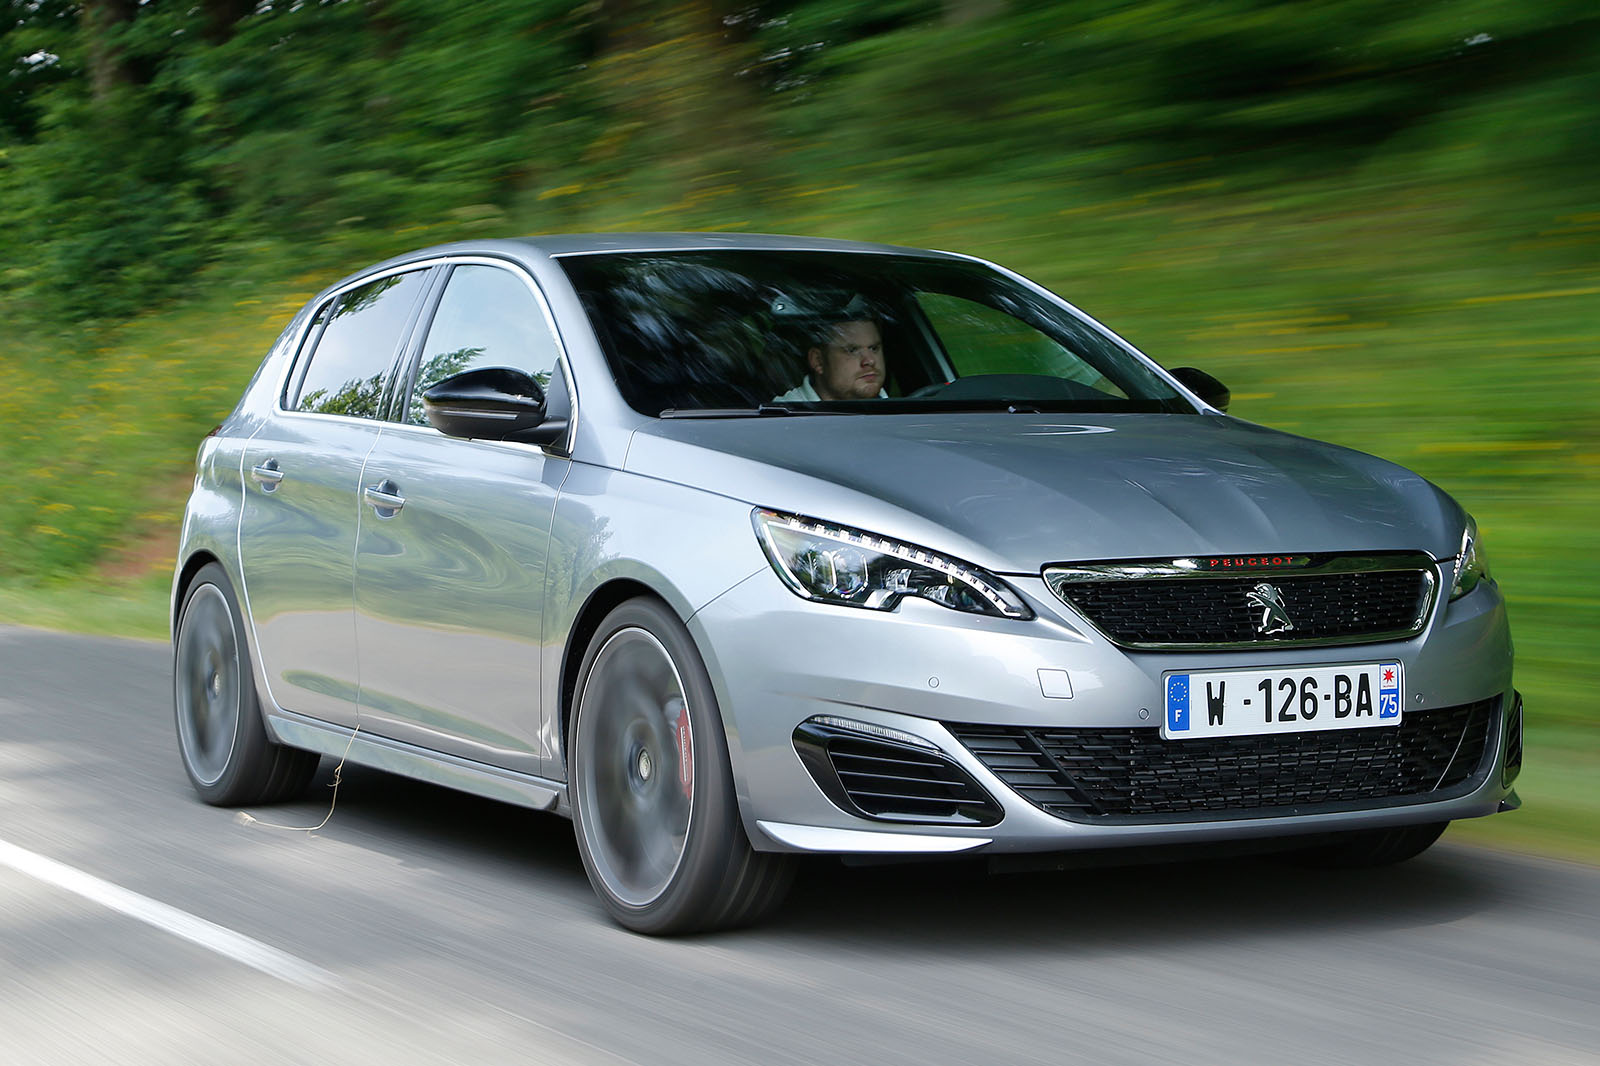 Peugeot takes on VW yet again with the new 308 GTi - Autoblog